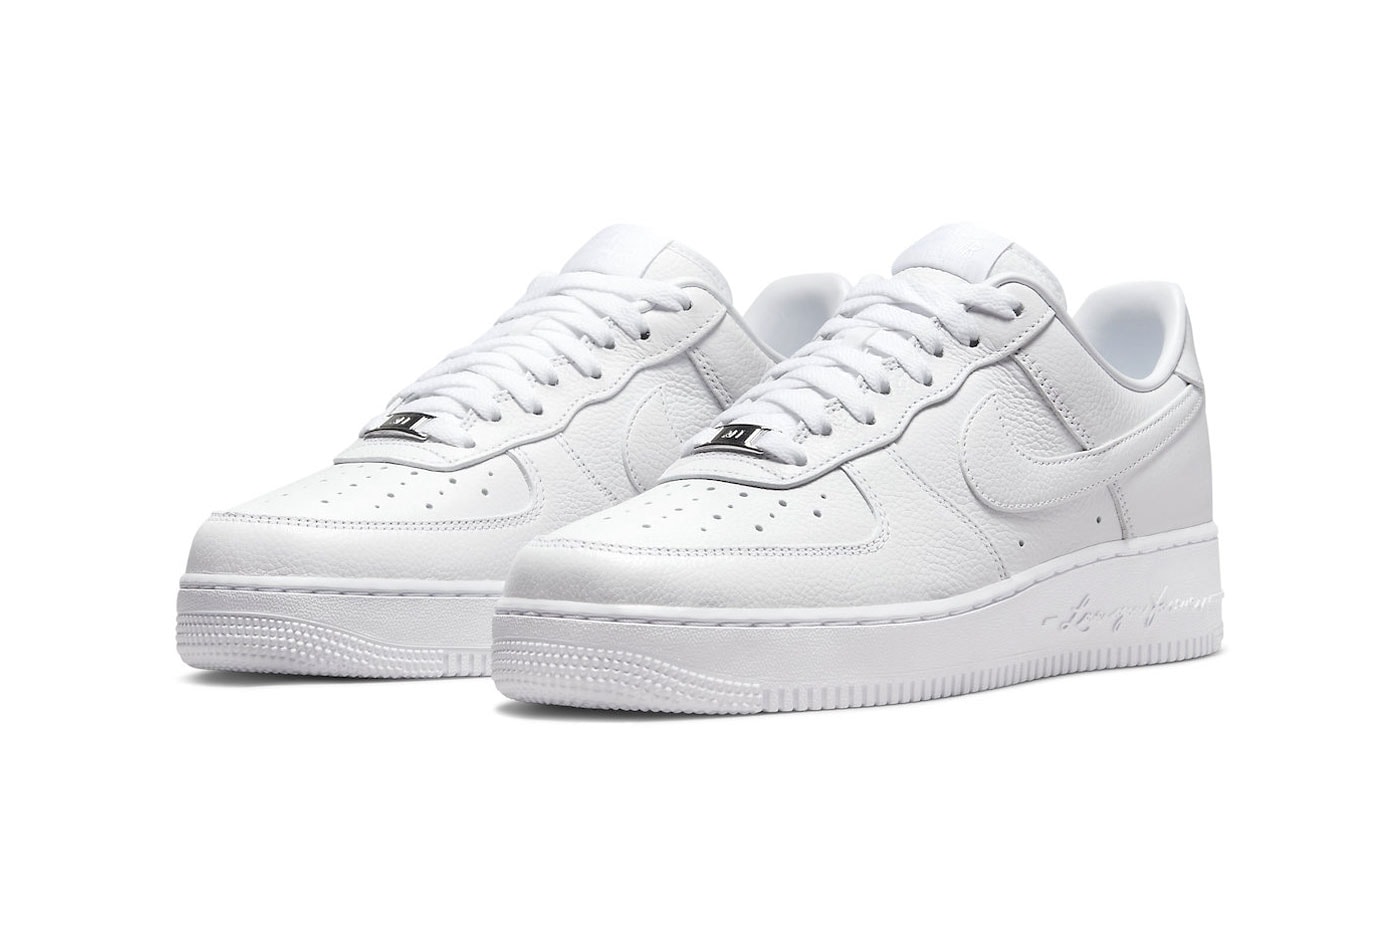 NOCTA x Nike Air Force 1「Certified Lover Boy」官方圖輯正式亮相